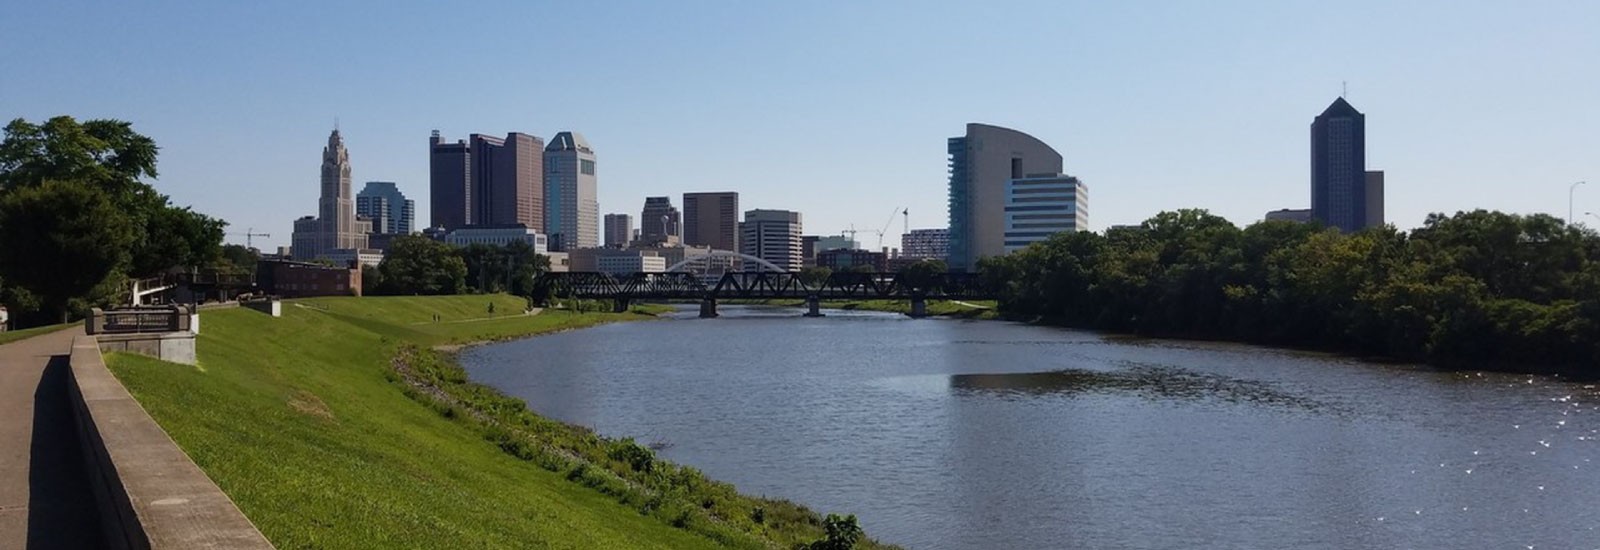 Skyline view of downtown Columbus, OH